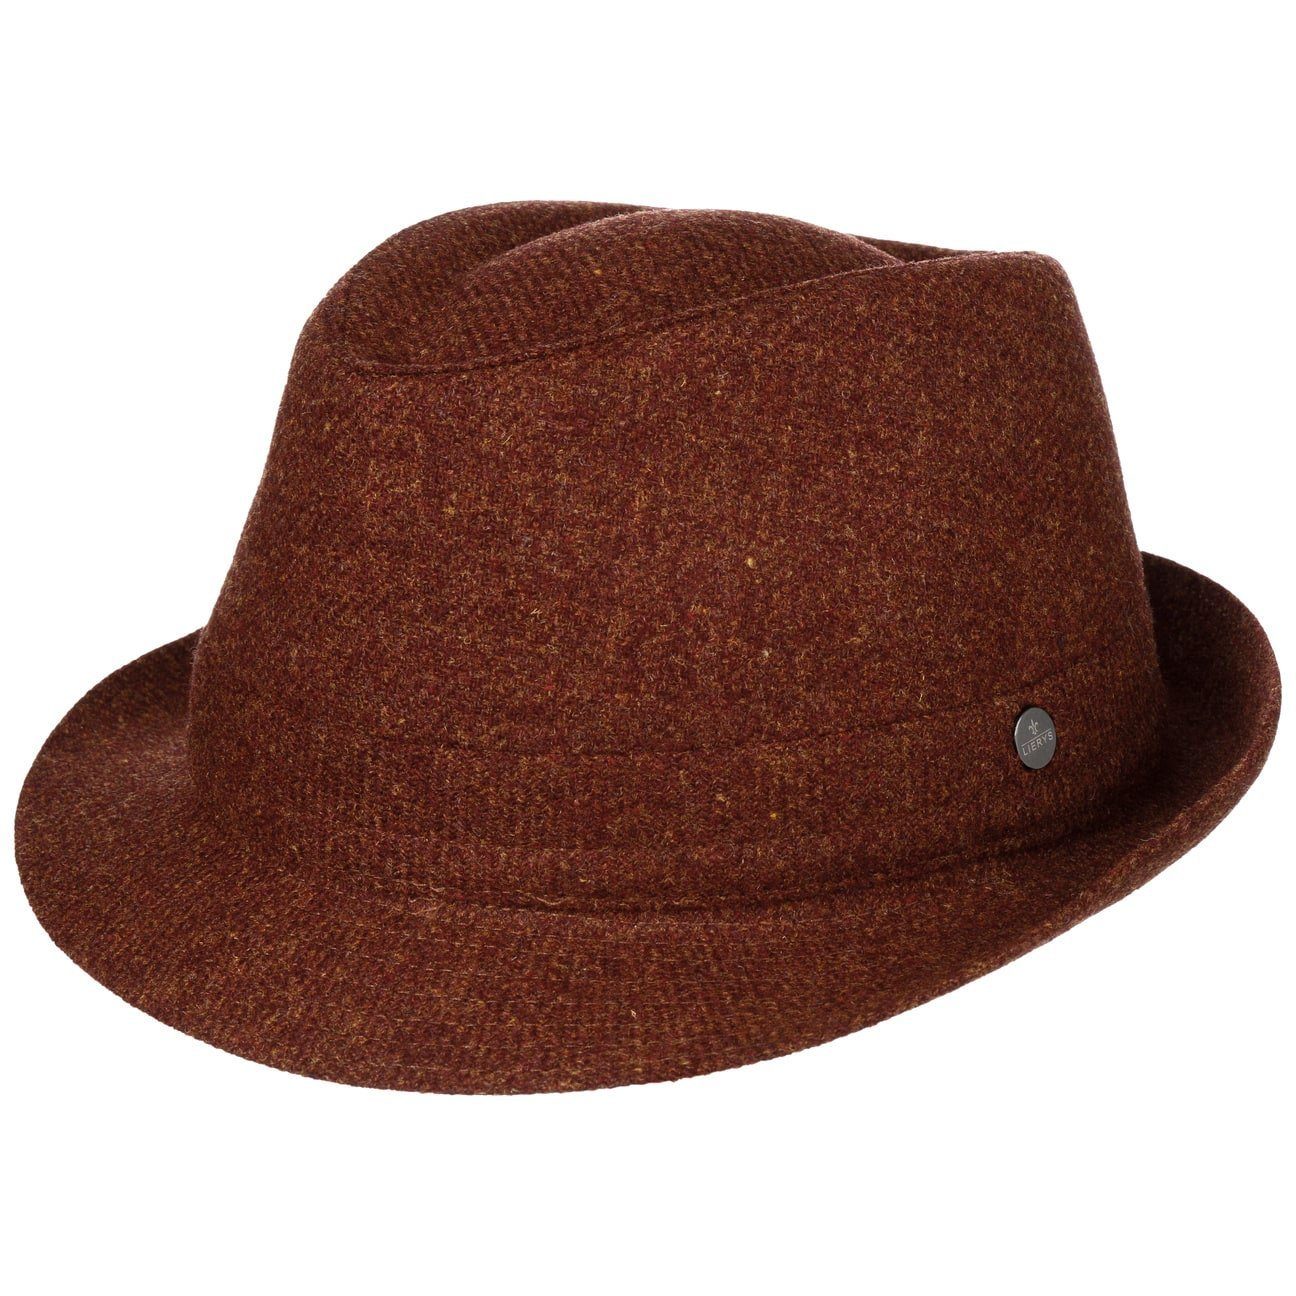 Made (1-St) in Lierys Trilby Wolltrilby Futter, mit Italy rost